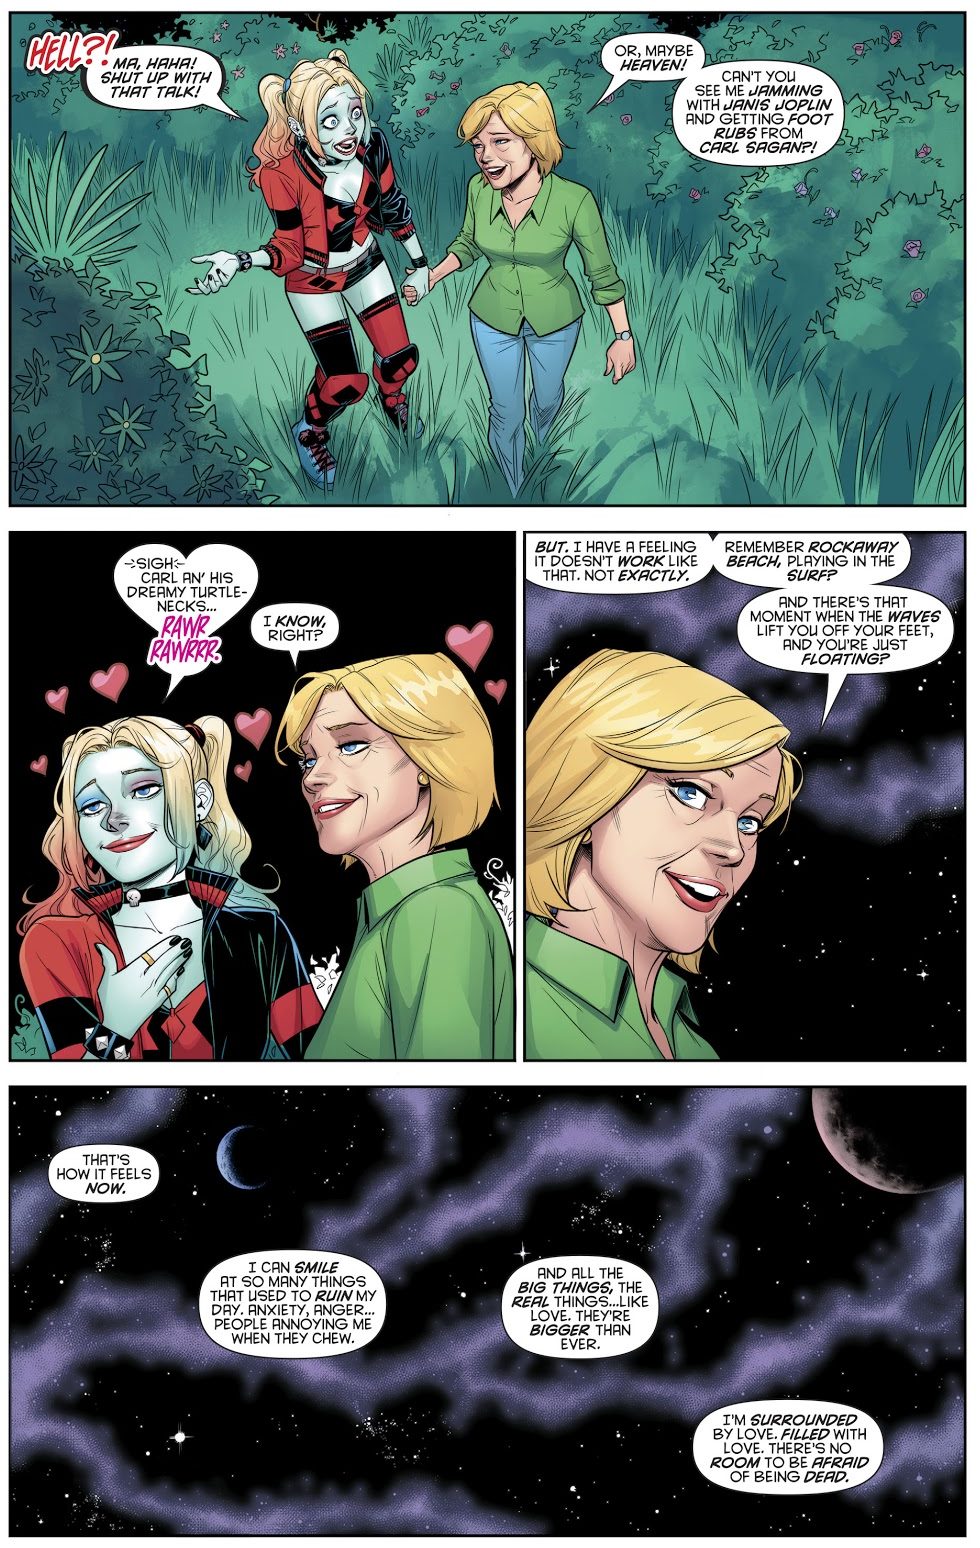 Harley Quinn Says Goodbye To Her Mother's Spirit 